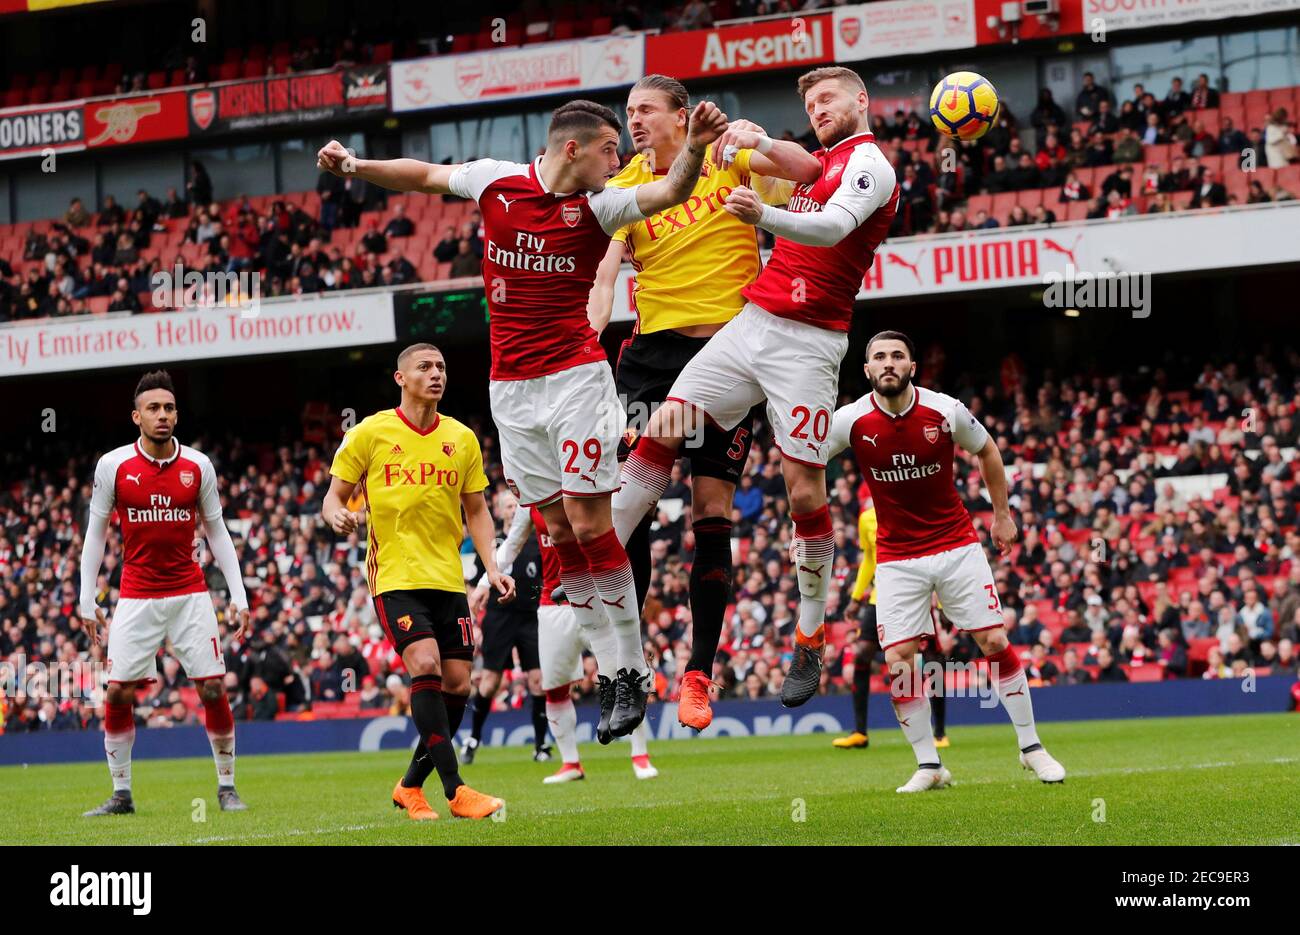 Soccer Football - Premier League - Arsenal vs Watford - Emirates Stadium, London, Britain - March 11, 2018   Arsenal's Granit Xhaka and Shkodran Mustafi in action with Watford's Sebastian Prodl    REUTERS/Eddie Keogh    EDITORIAL USE ONLY. No use with unauthorized audio, video, data, fixture lists, club/league logos or "live" services. Online in-match use limited to 75 images, no video emulation. No use in betting, games or single club/league/player publications.  Please contact your account representative for further details. Stock Photo